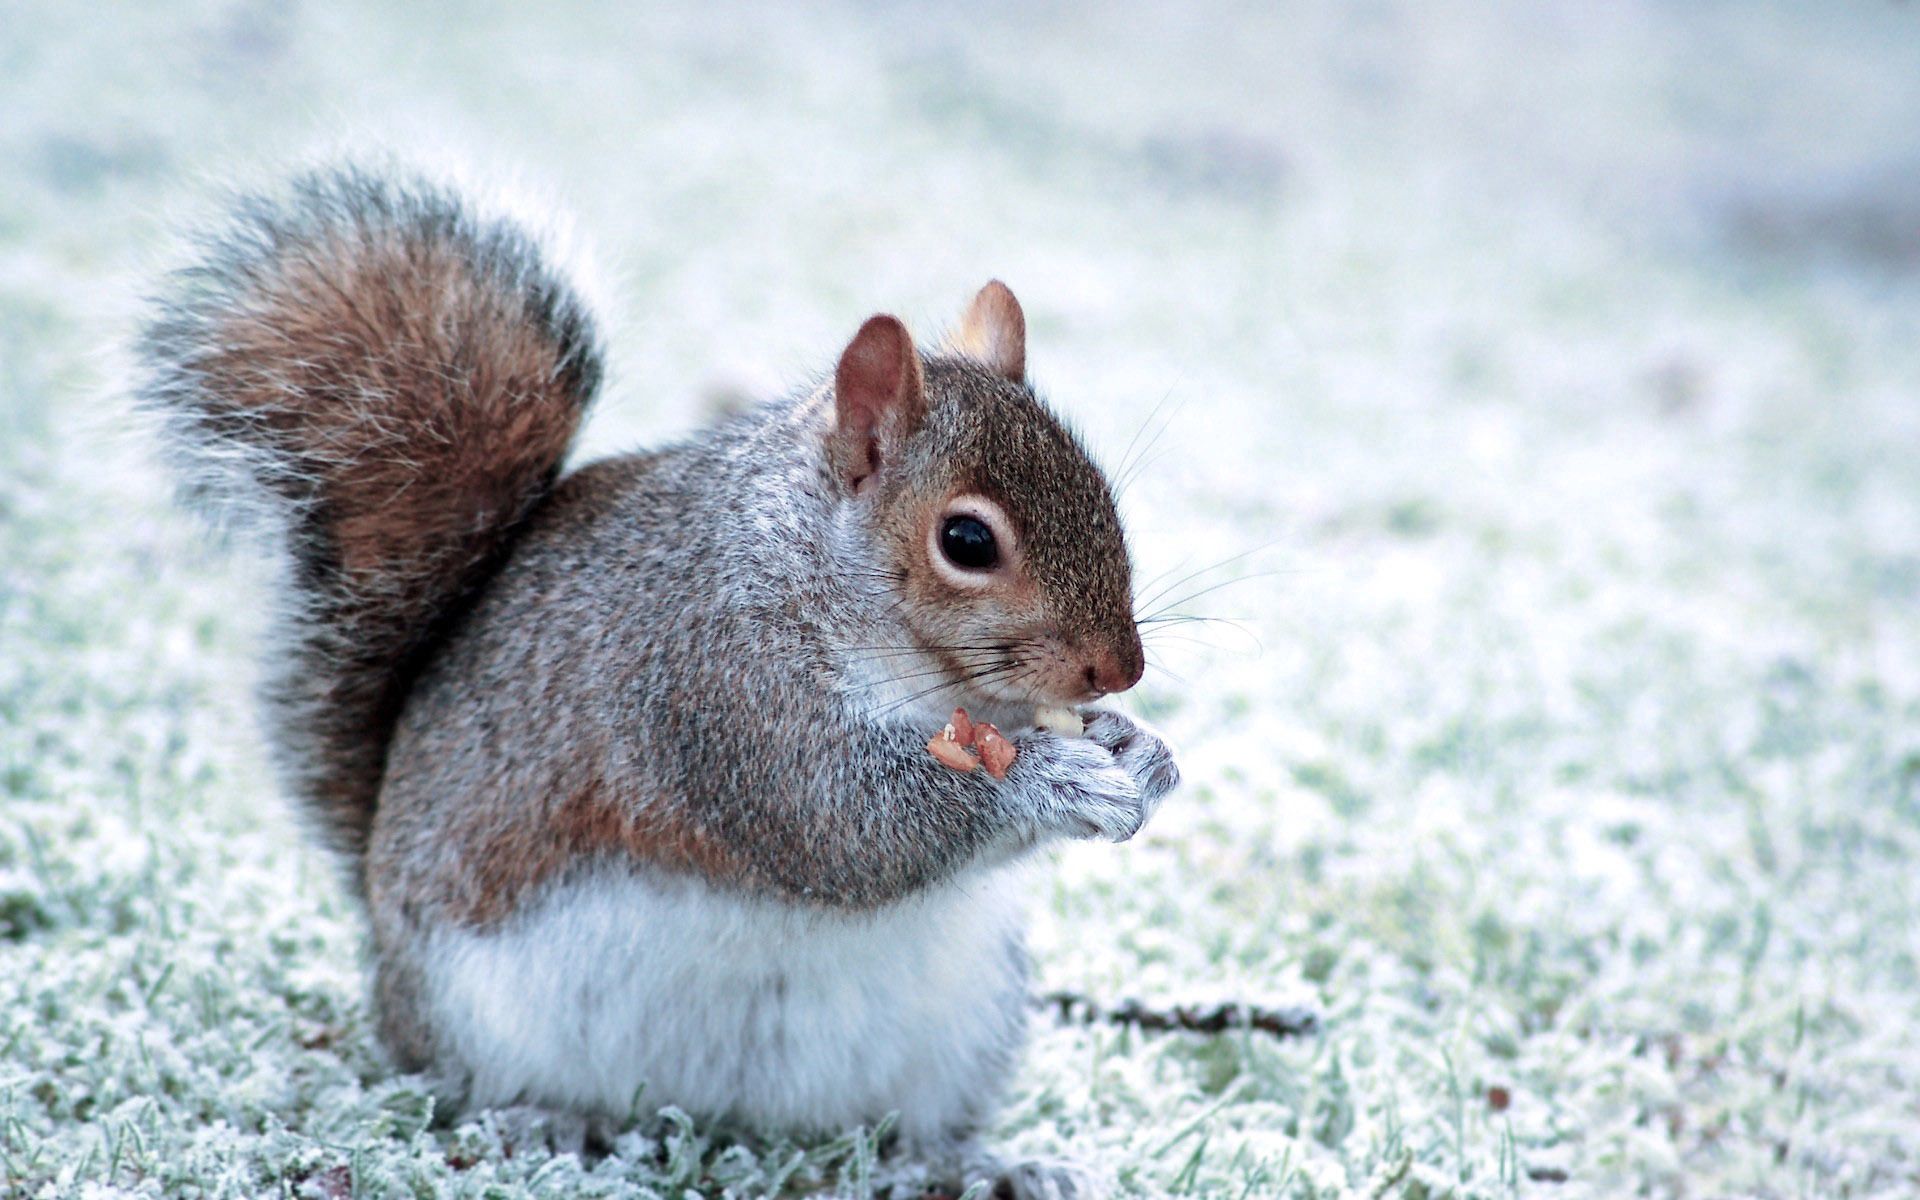 New Lock Screen Wallpapers animals, squirrel, food, fluffy, animal